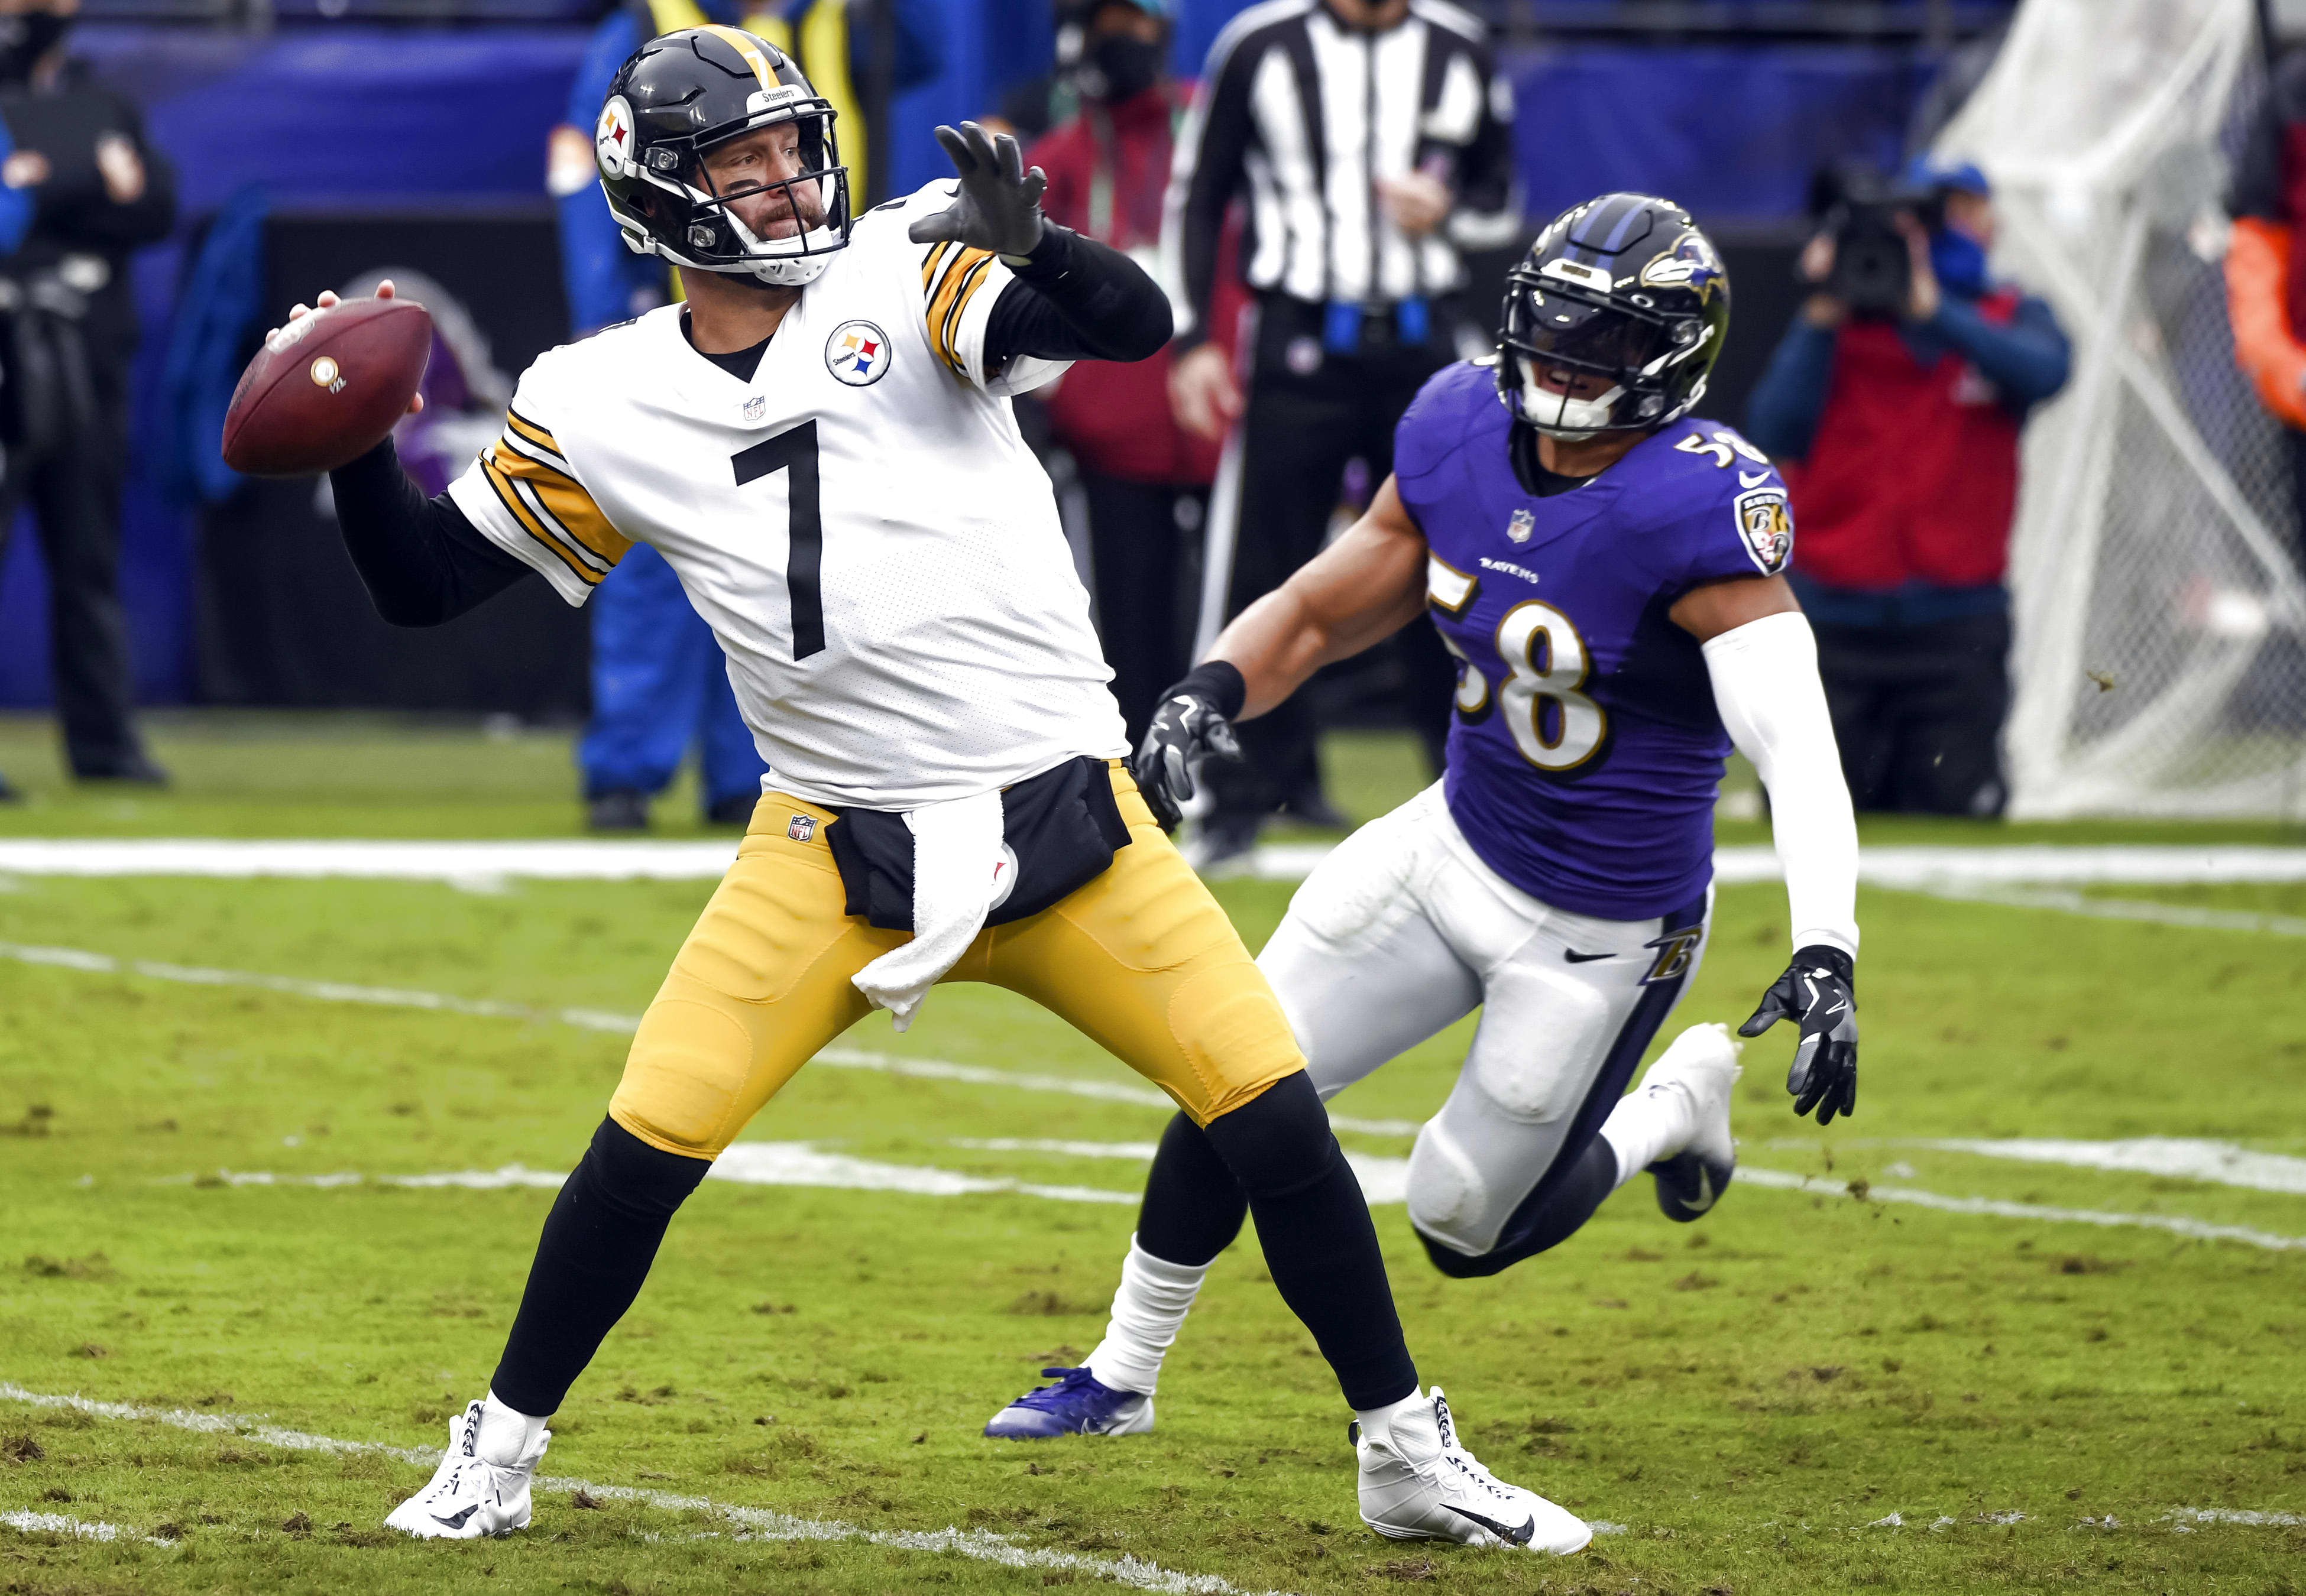 NFLs Steelers-Ravens game postponed a third time due to Covid